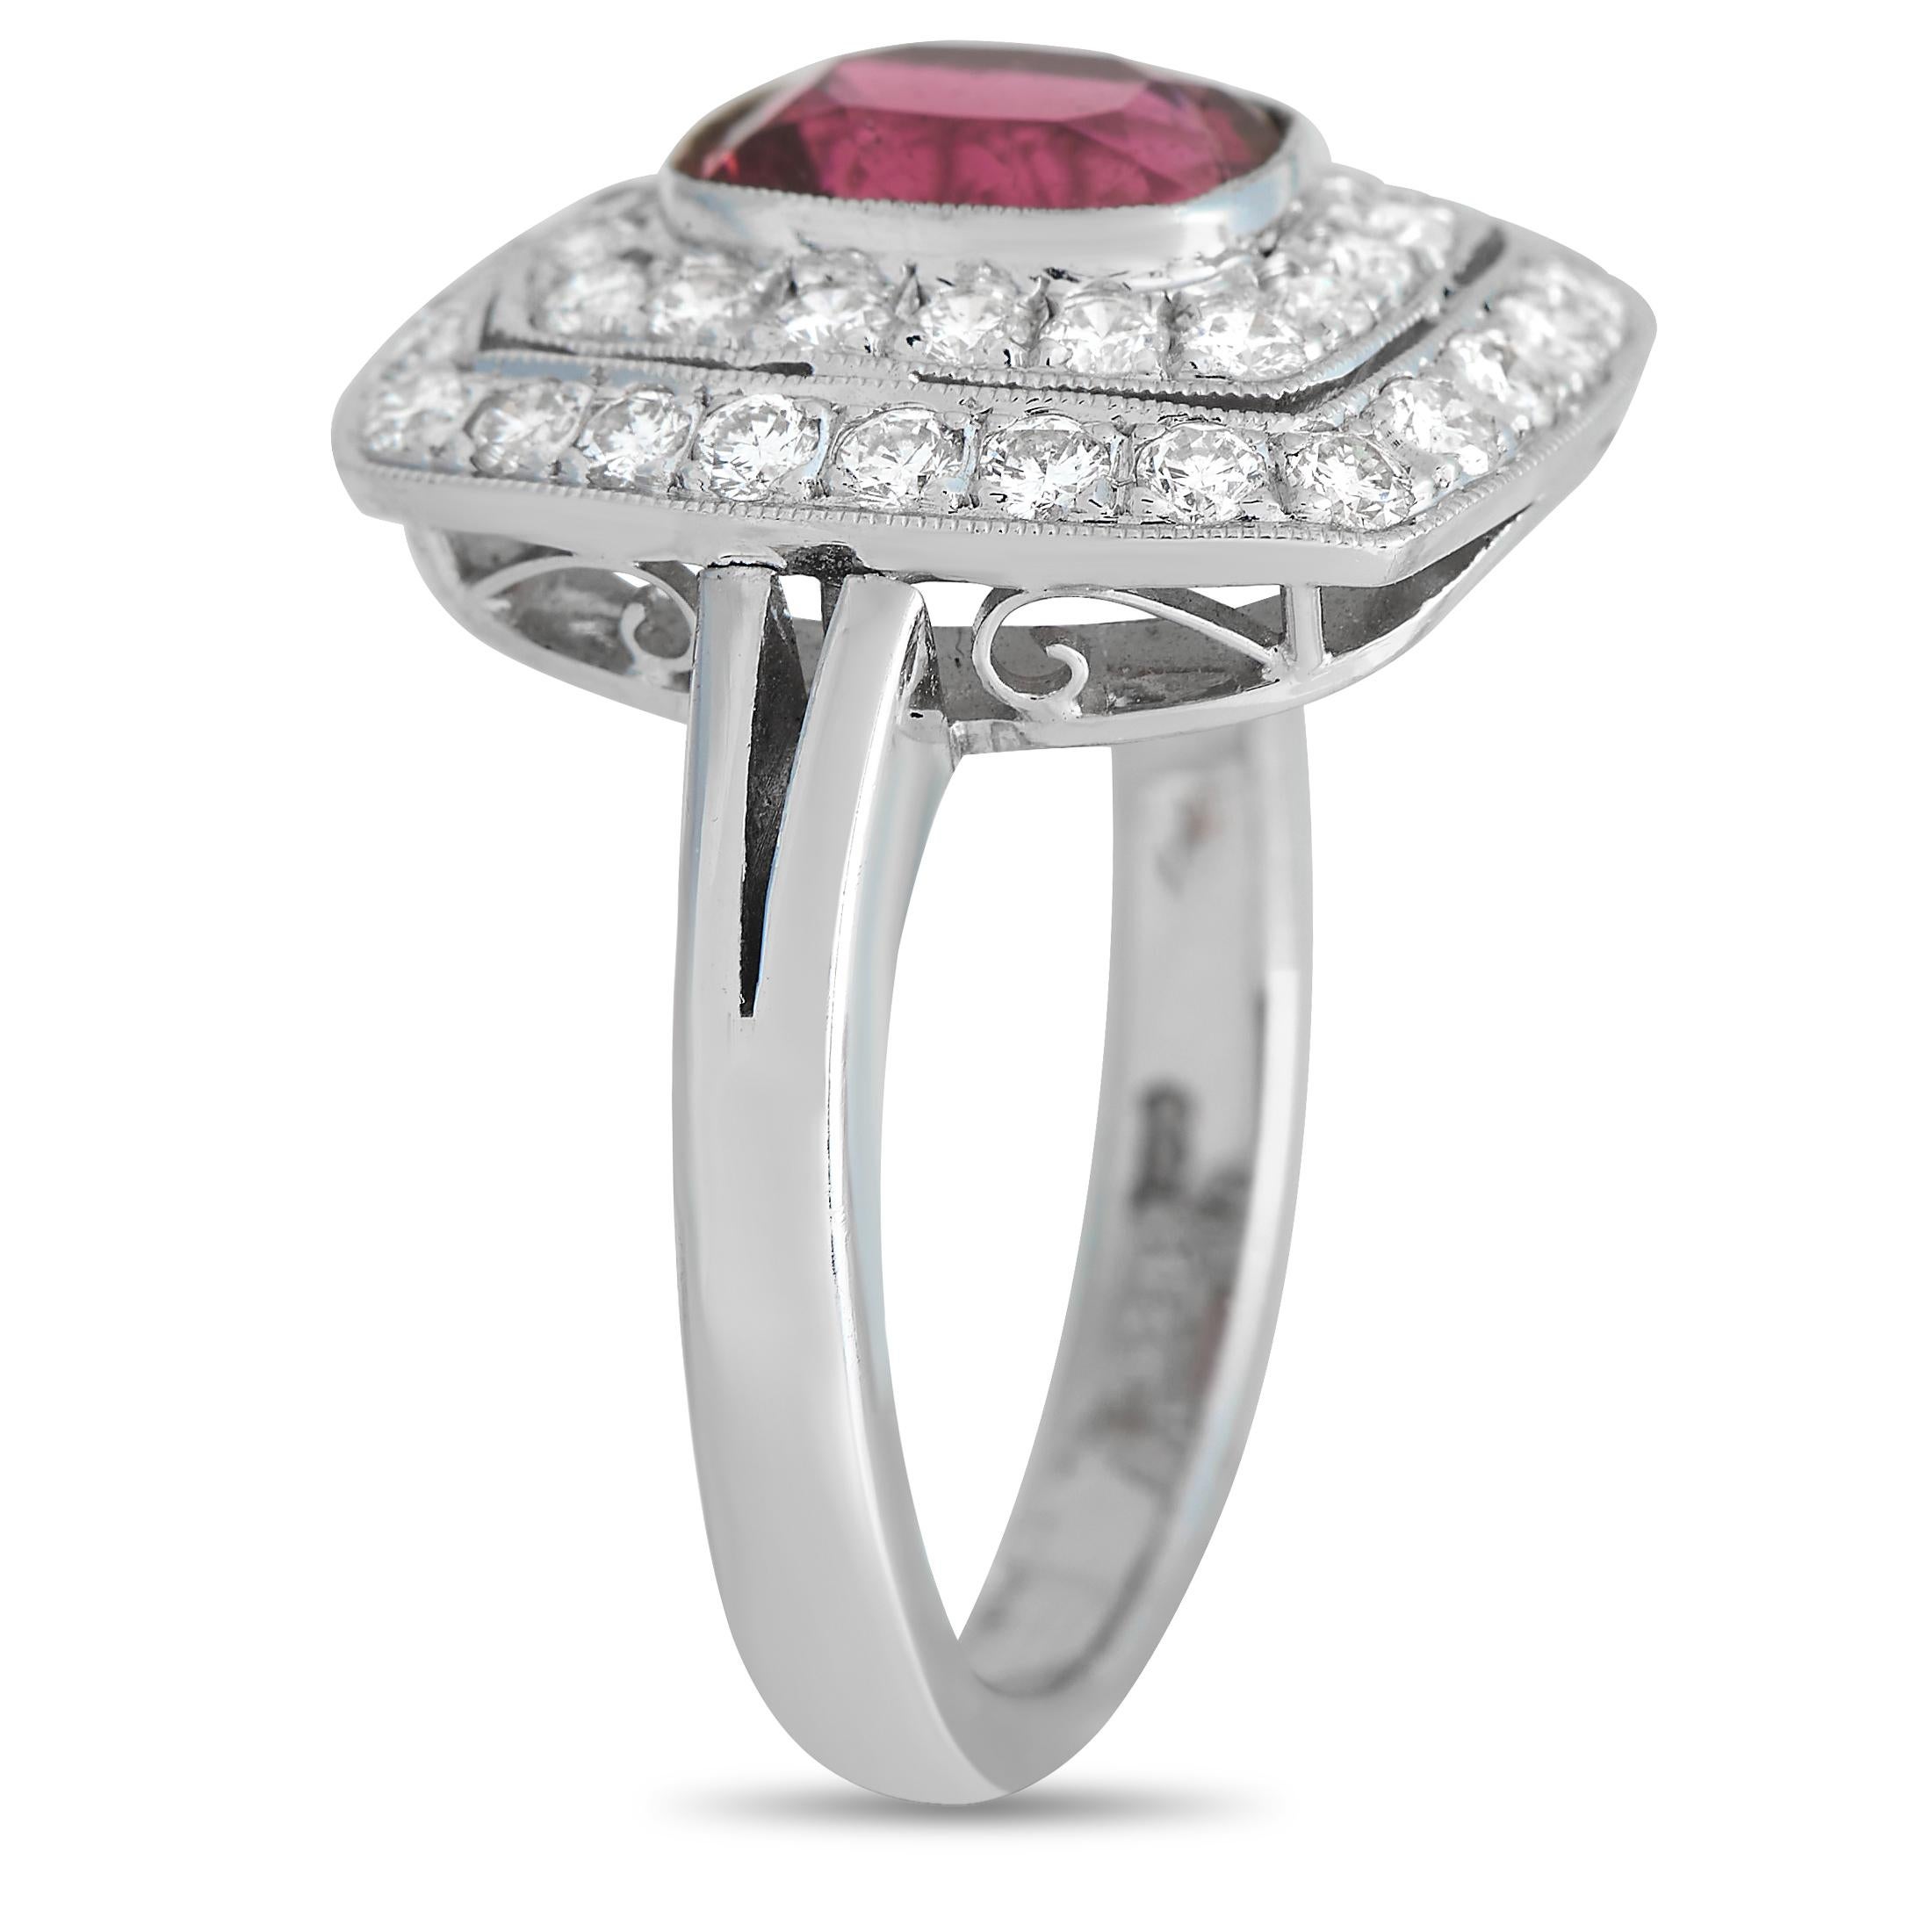 With this stunner on your finger, you can effortlessly make an outfit shine bright like a diamond. This 18K white gold ring with a subtle split shank holds a 1.47-carat rubellite - a beautiful pinkish-red tourmaline. The striking gemstone sits on a